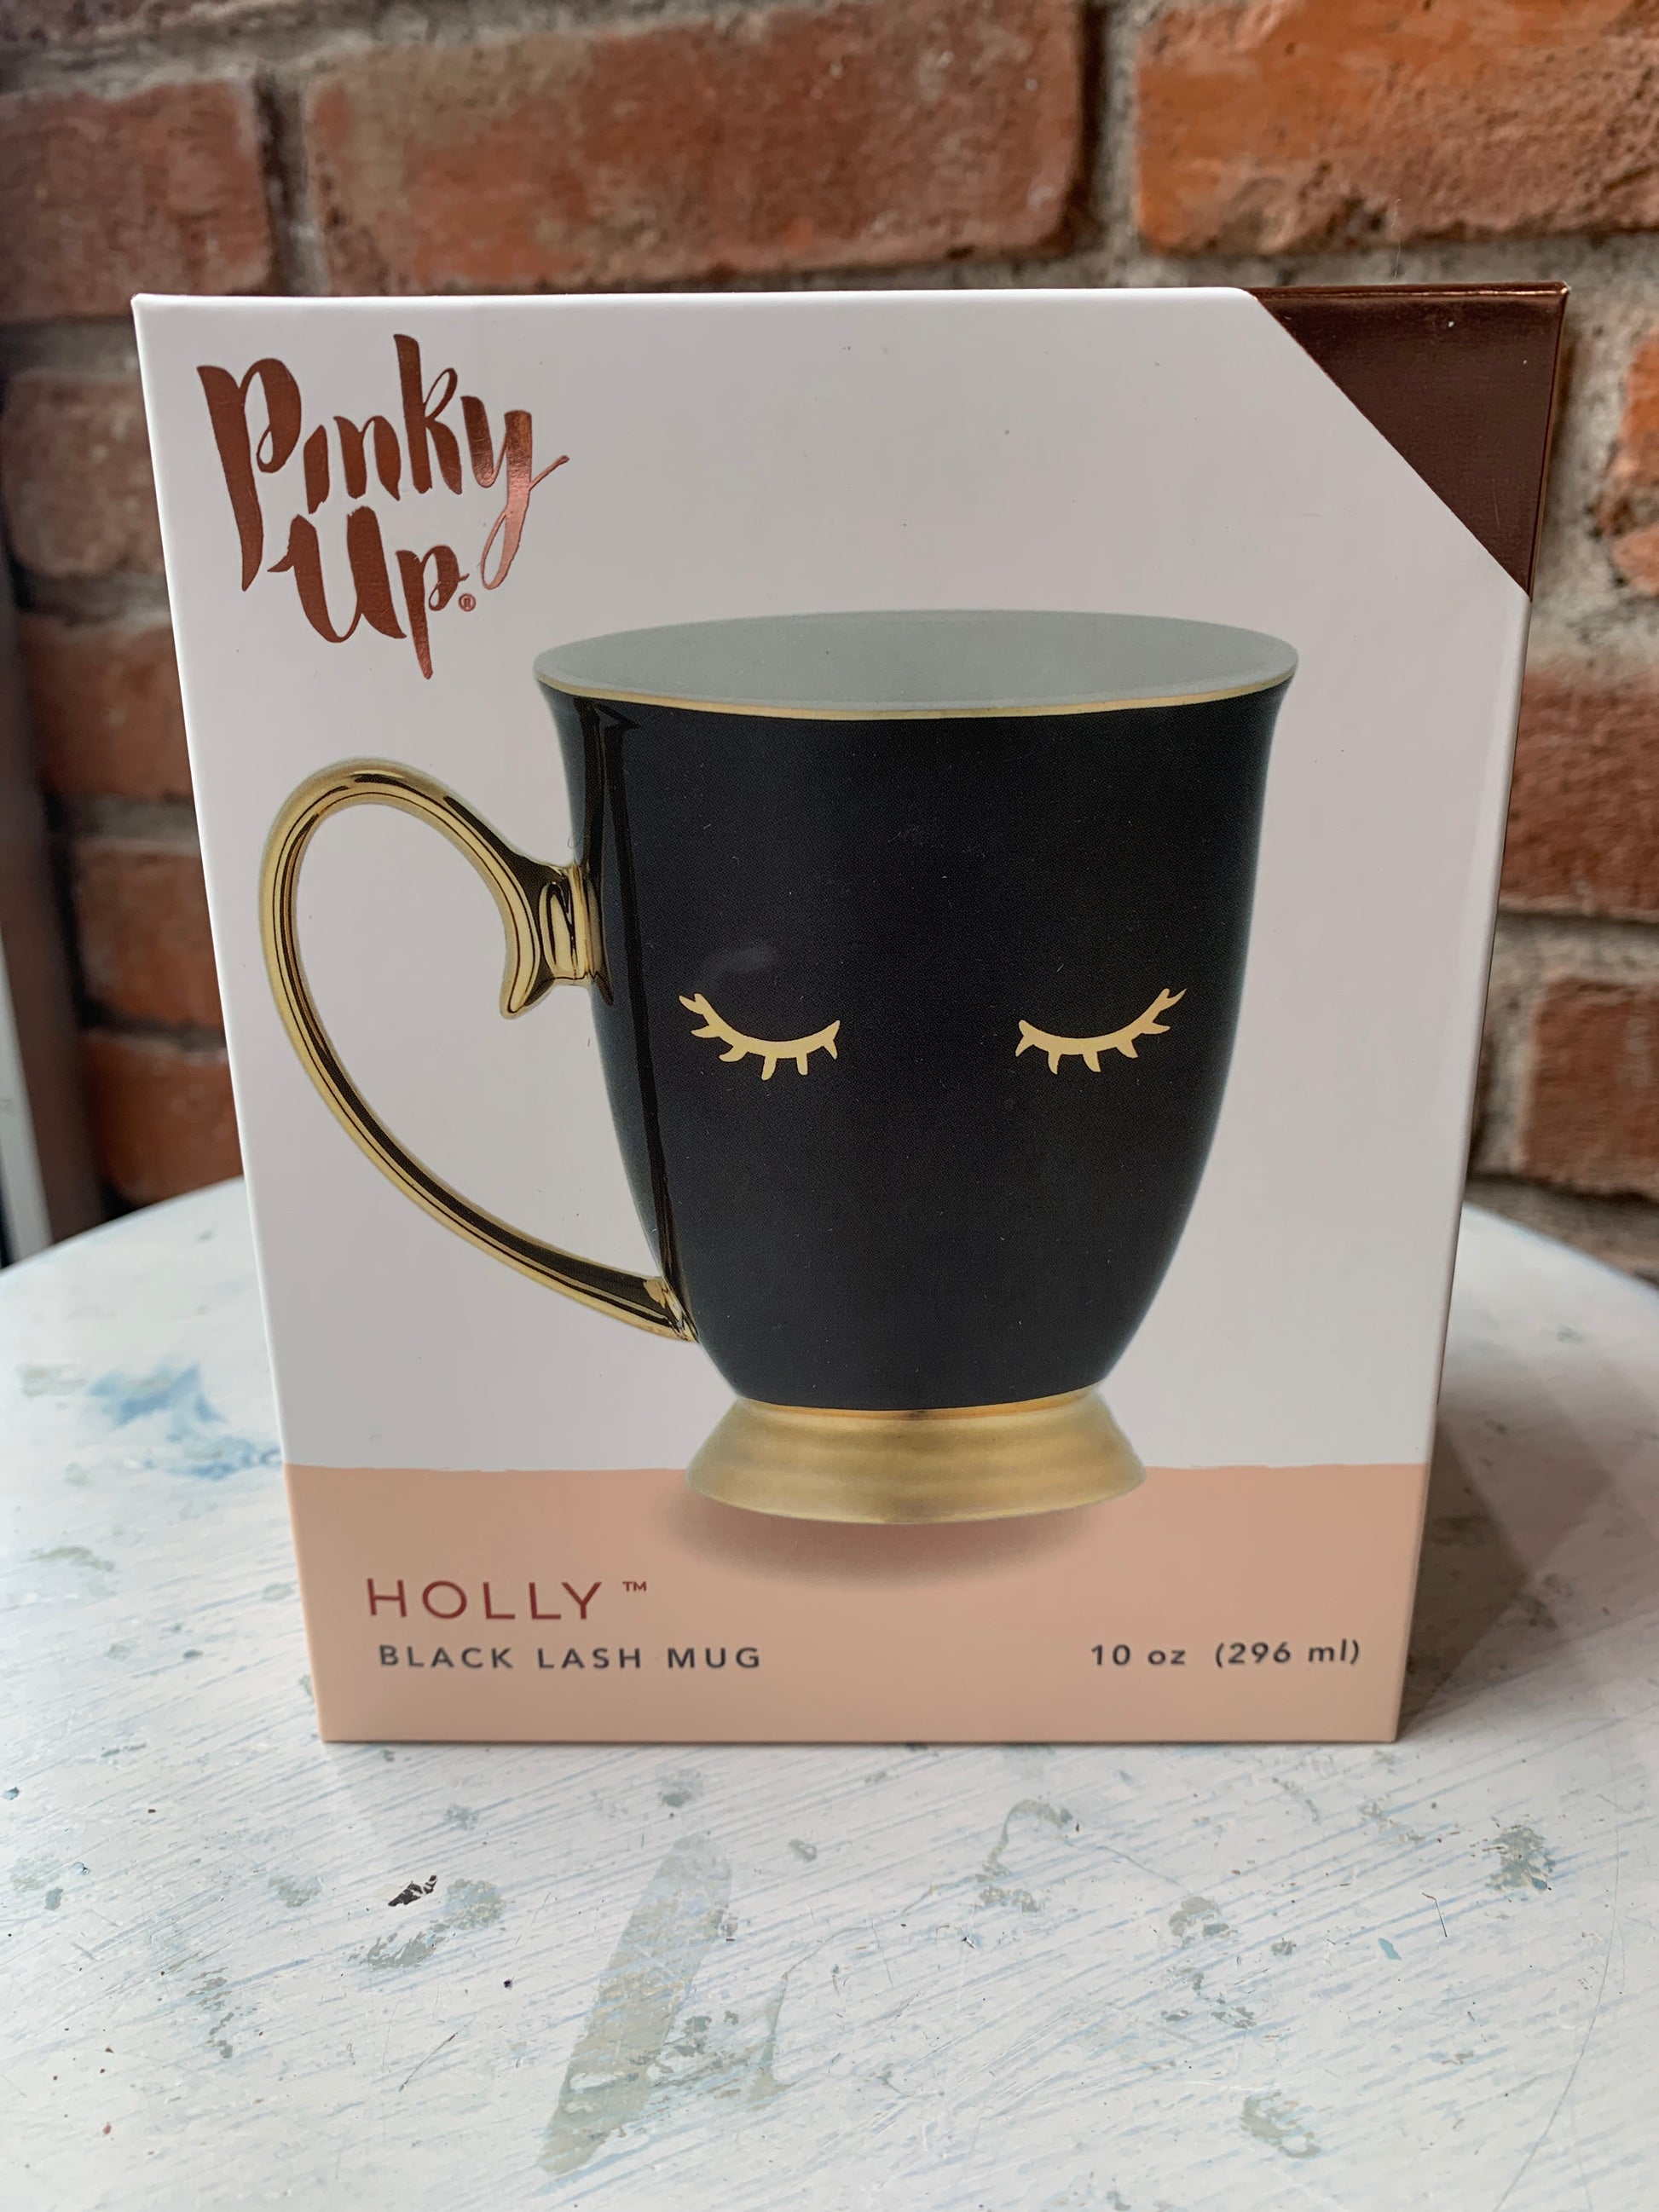 Black mug with gold accents. Will hold 10 oz. of your favorite beverage!